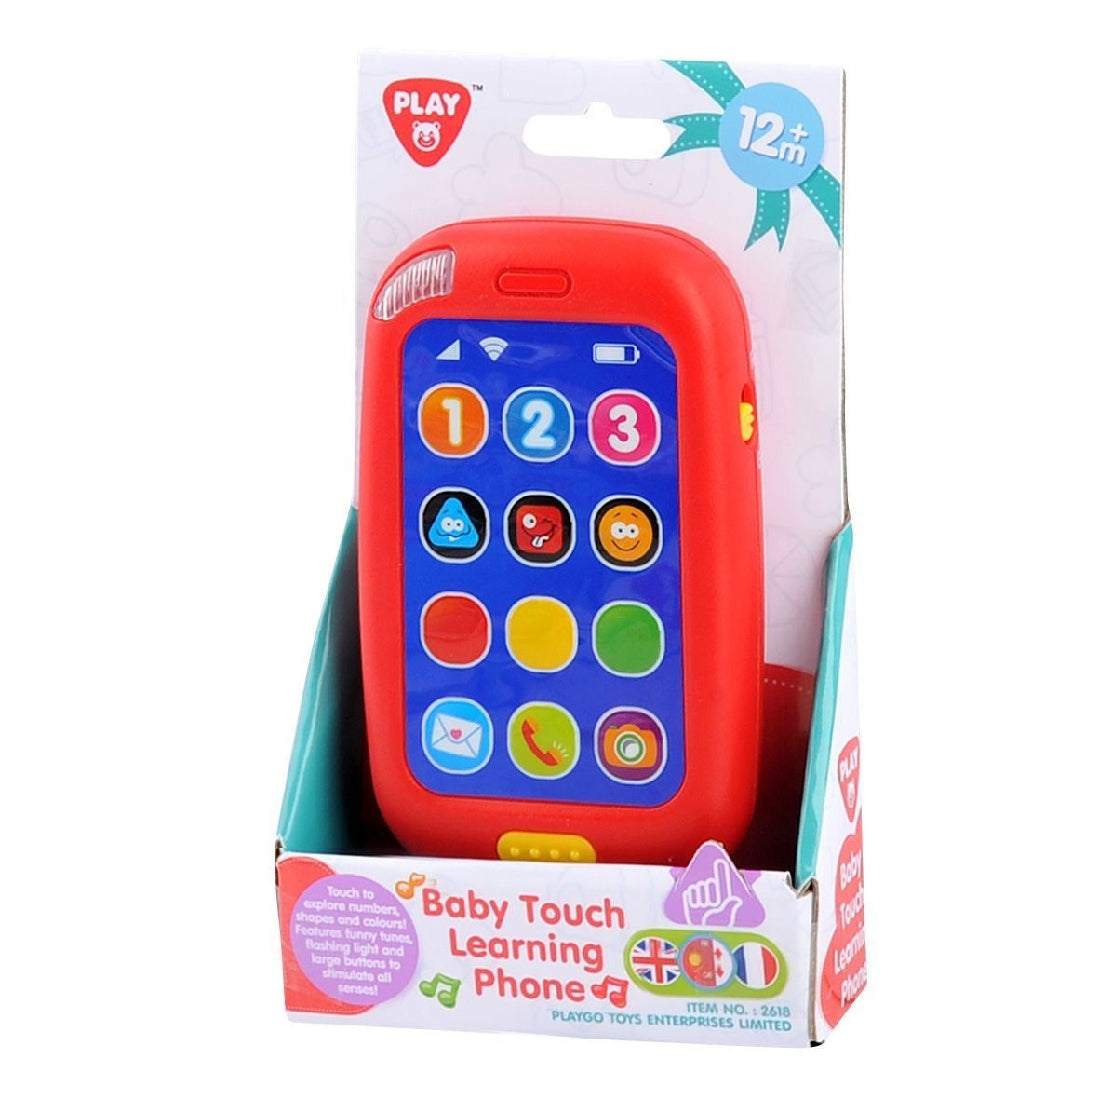 Playgo Baby Touch Learning Phone - Red